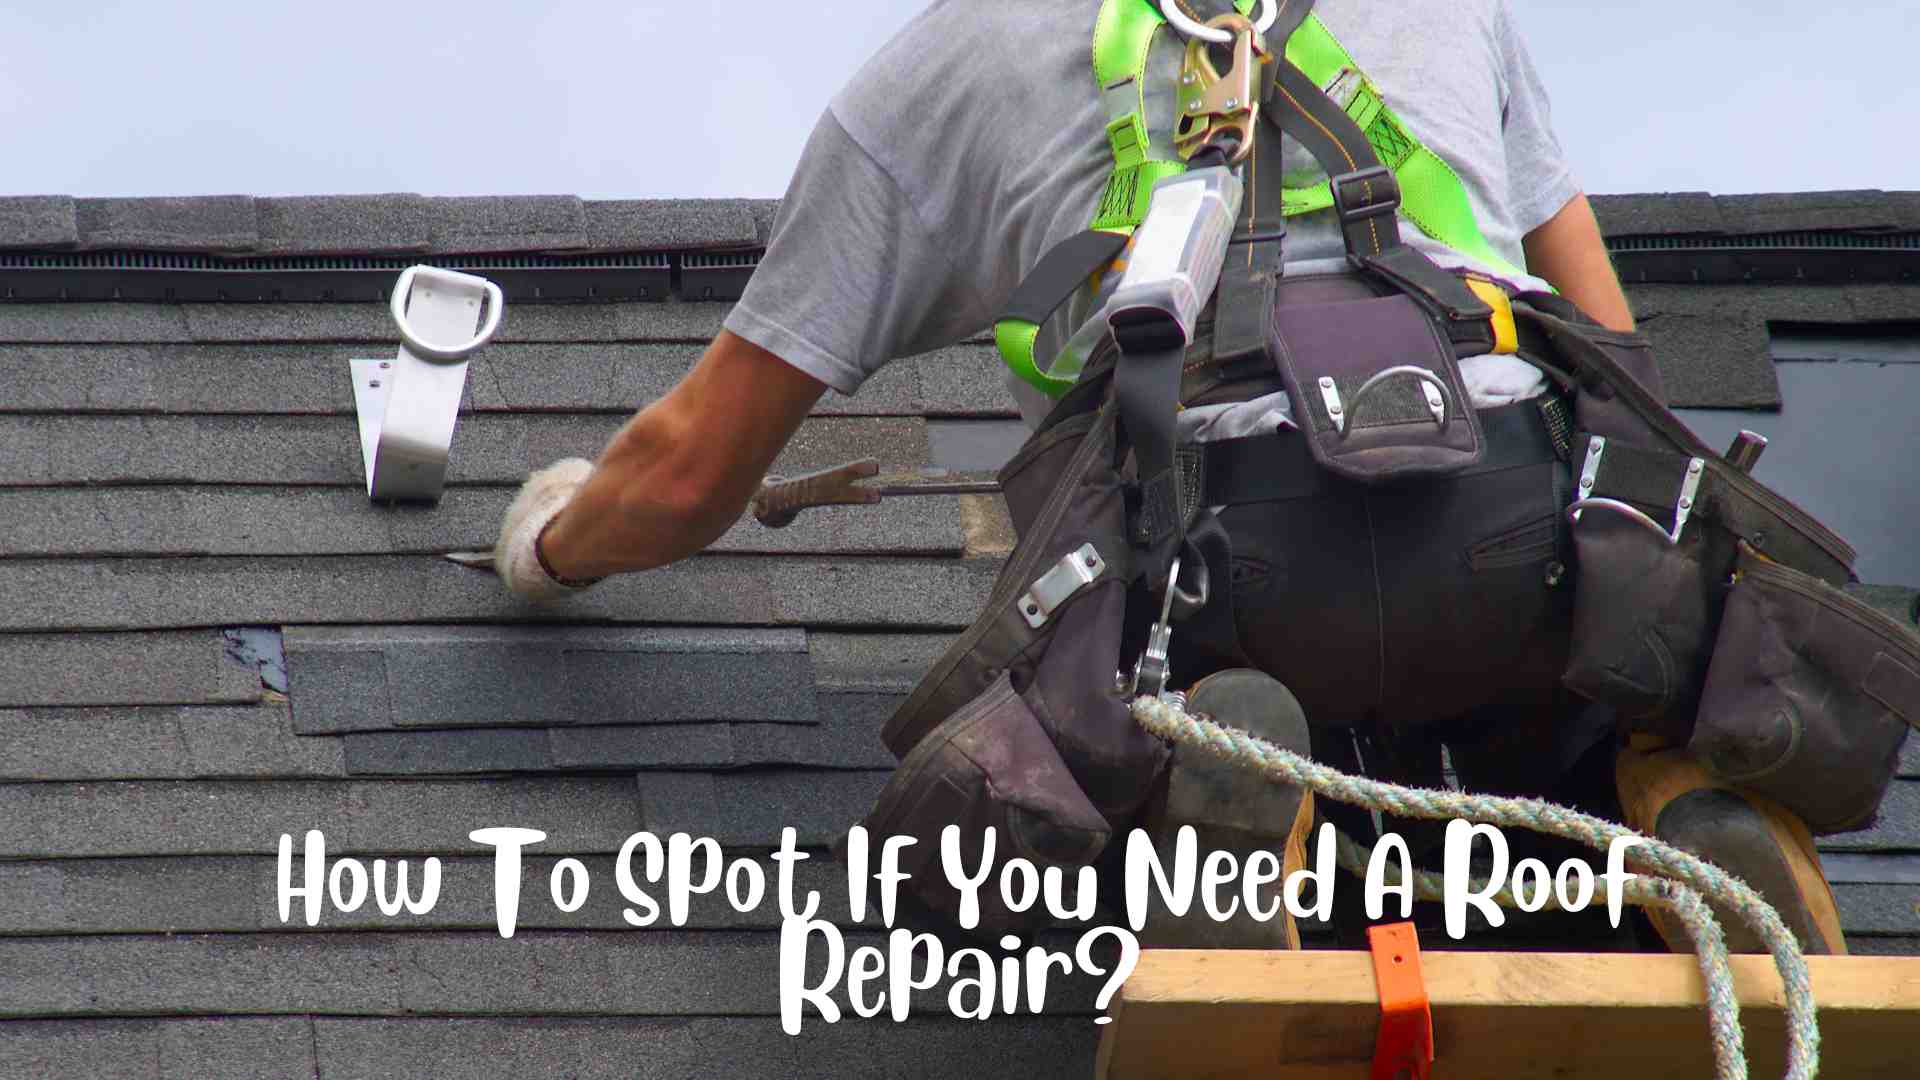 How To Spot If You Need A Roof Repair